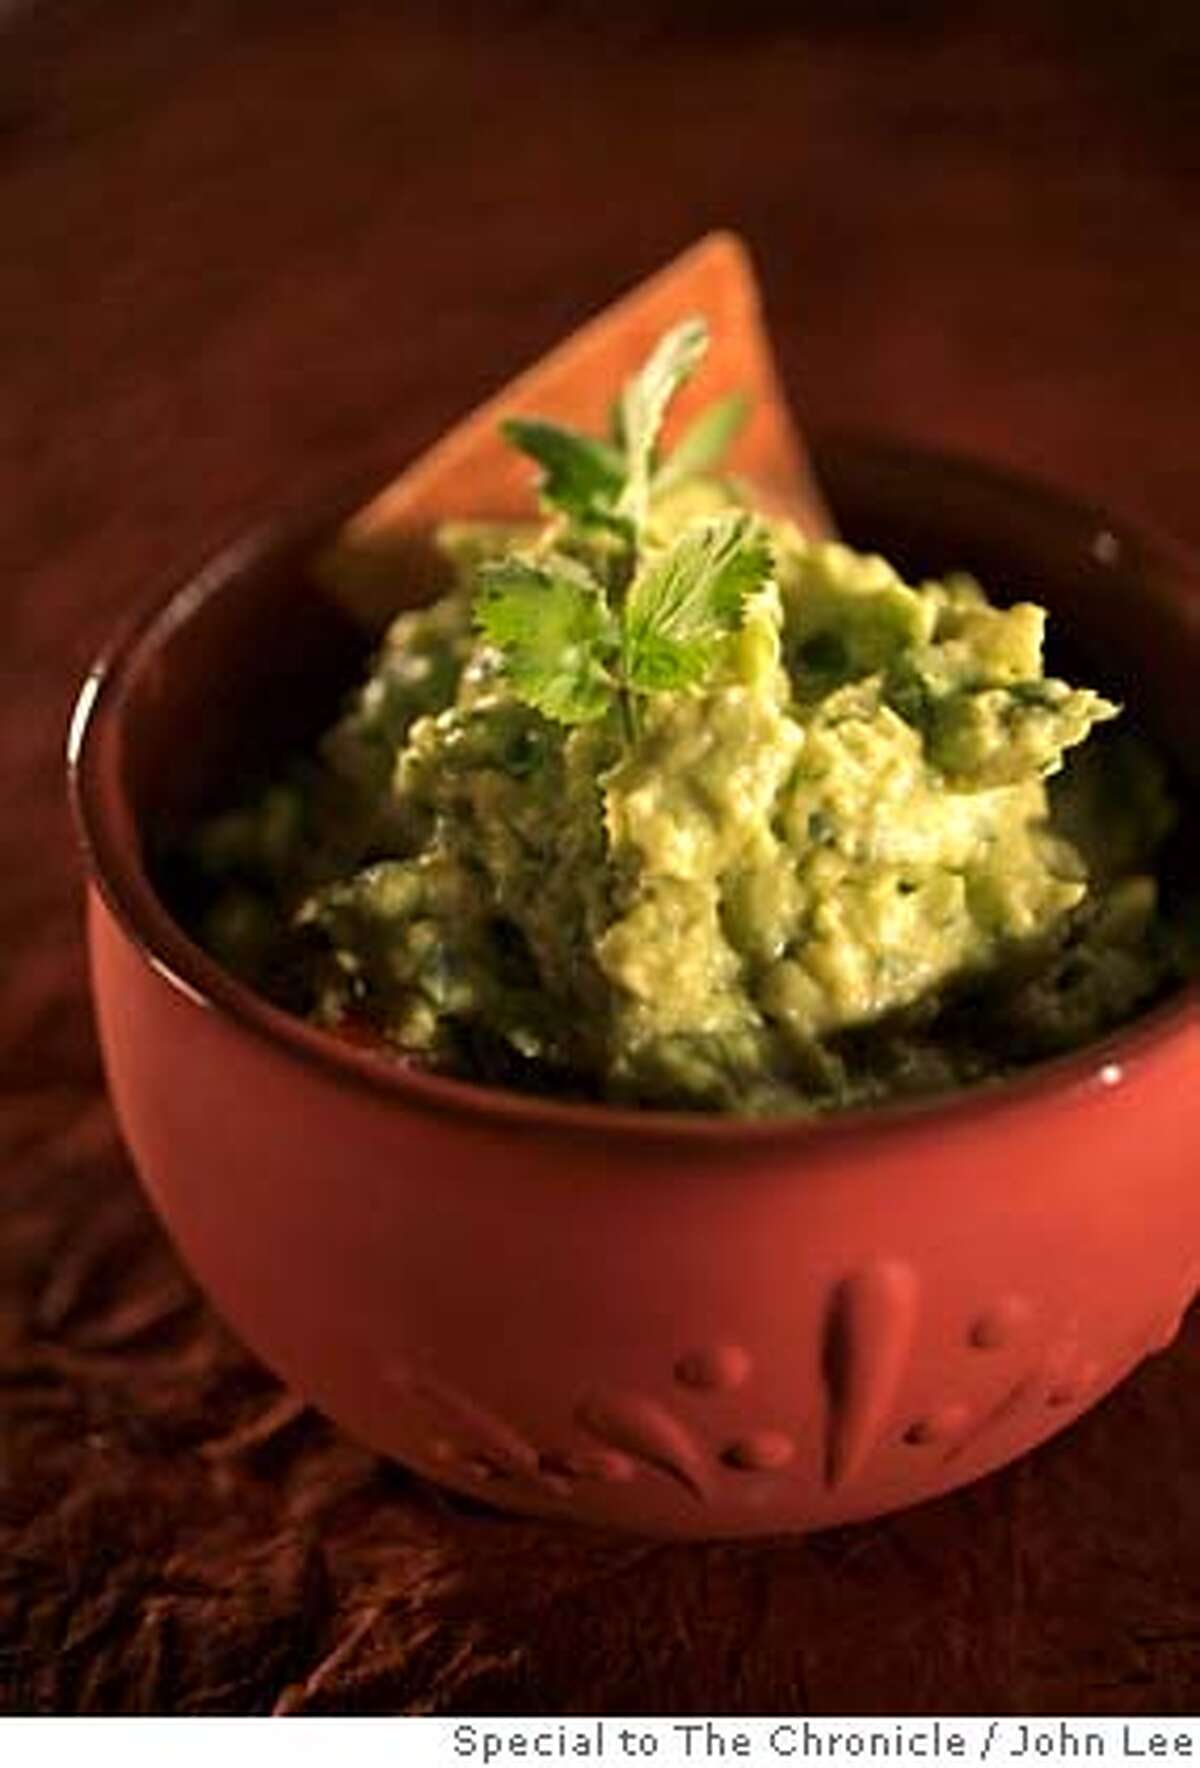 ###Live Caption:SOUTH30_09_JOHNLEE.JPG APRIL 24, 2008: Guacamole for Jacqueline Higuera McMahan's South to North column on Cinco de Mayo. BY JOHN LEE / SPECIAL TO THE CHRONICLE###Caption History:SOUTH30_09_JOHNLEE.JPG APRIL 24, 2008: Guacamole for Jacqueline Higuera McMahan's South to North column on Cinco de Mayo. BY JOHN LEE / SPECIAL TO THE CHRONICLE###Notes:###Special Instructions: